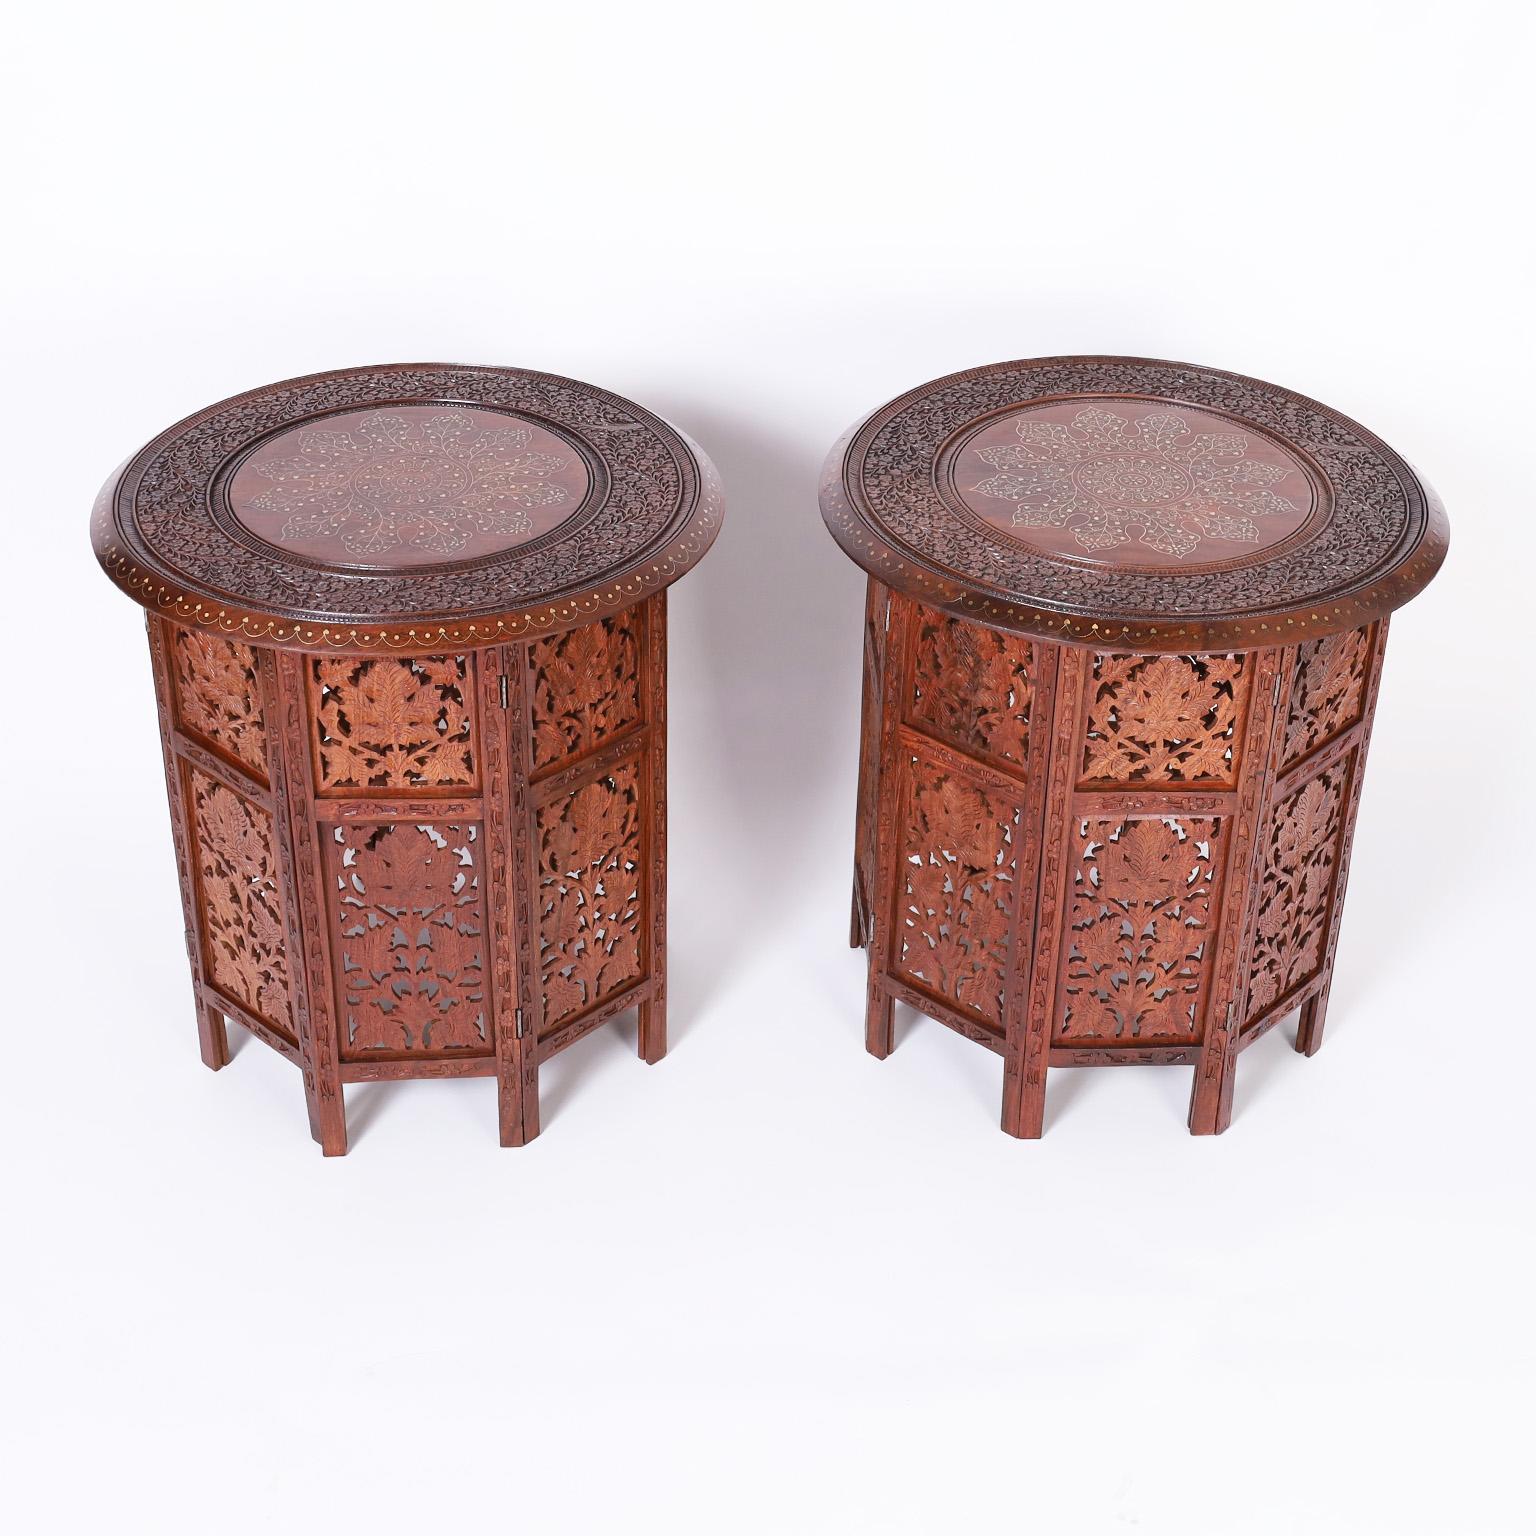 Impressive pair of Anglo Indian stands crafted in mahogany with round tops having brass string inlays in a center medallion with emanating floral designs inside elaborate leaf carvings. The octagon bases have carved leaves in open fretwork.